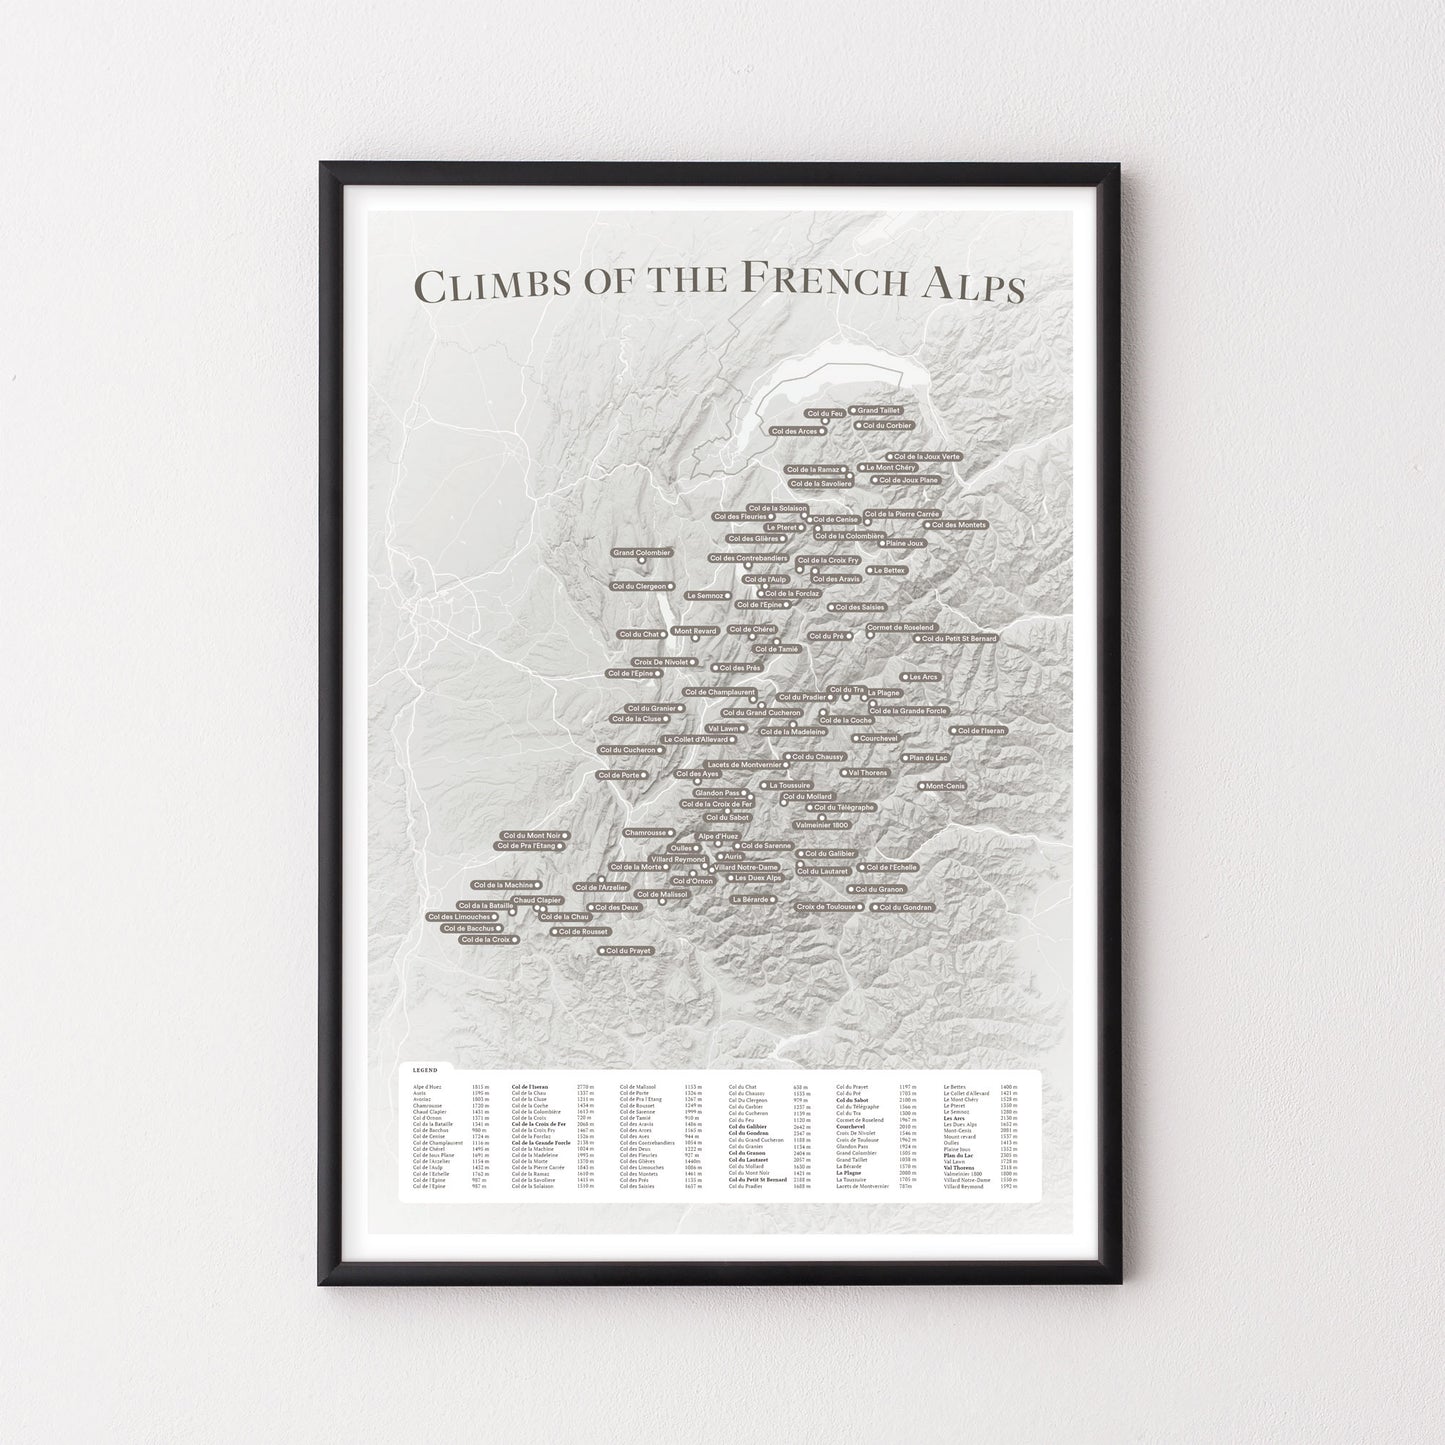 Climbs of the French Alps – Poster – The English Cyclist